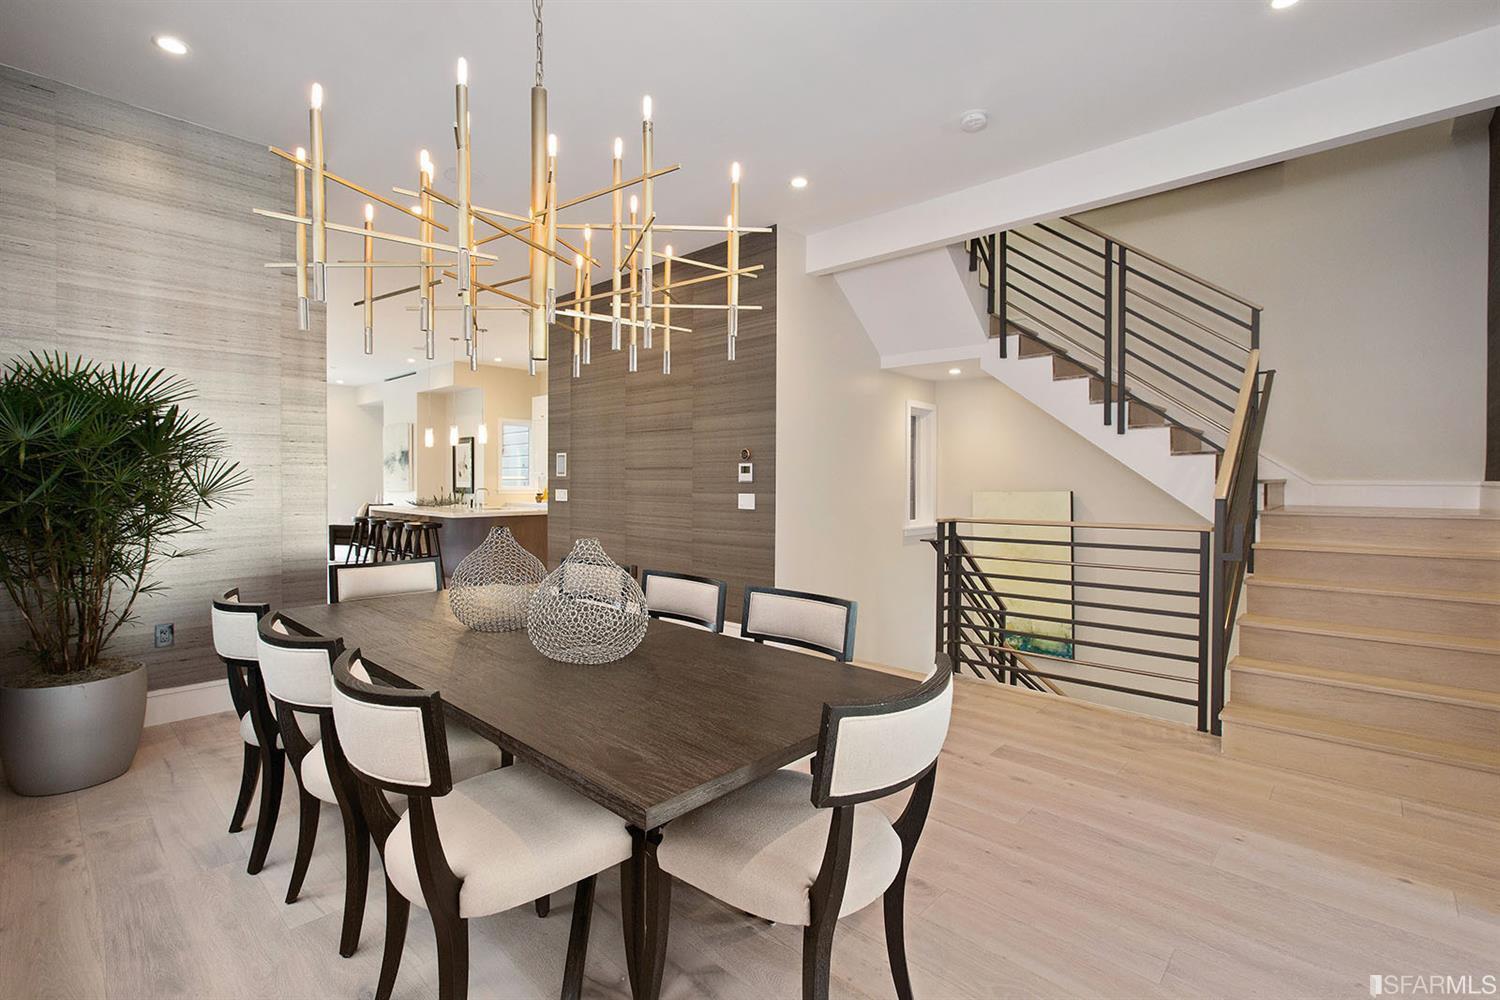 Dining room with chandelier downstairs residence SF image #1